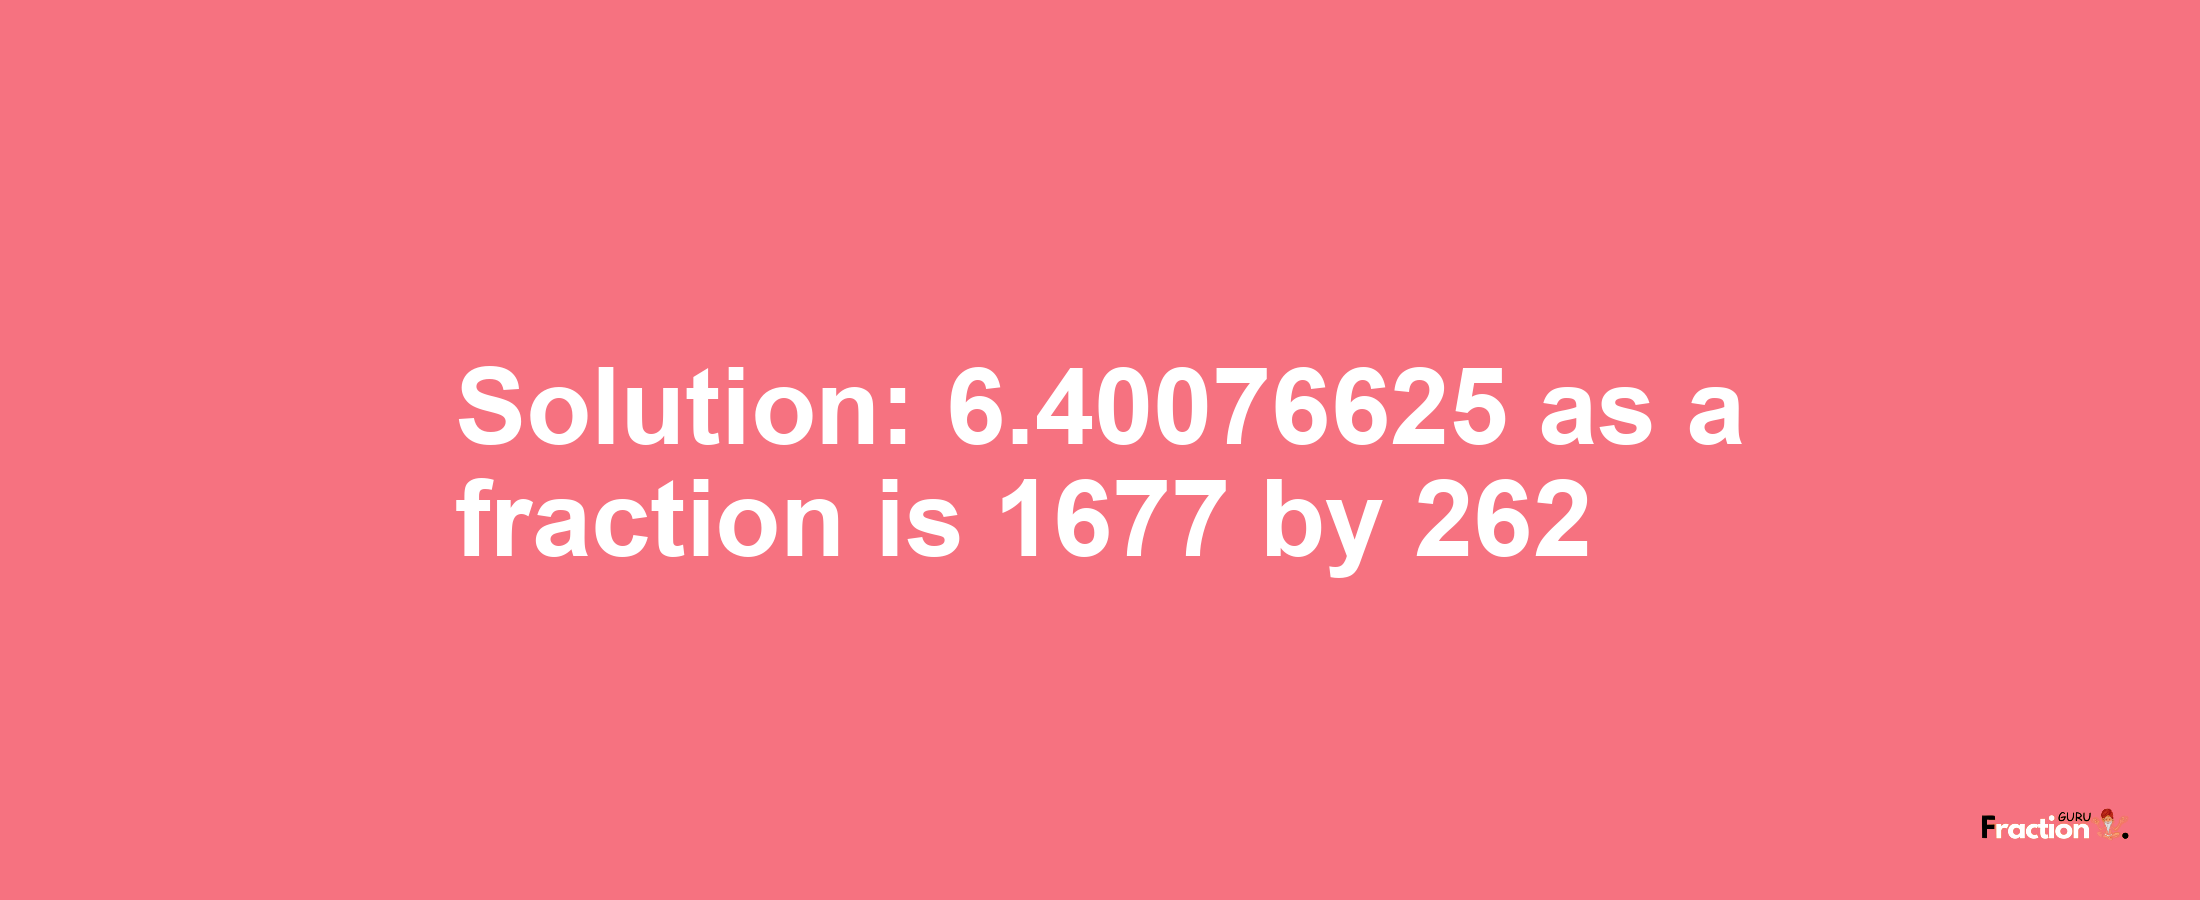 Solution:6.40076625 as a fraction is 1677/262